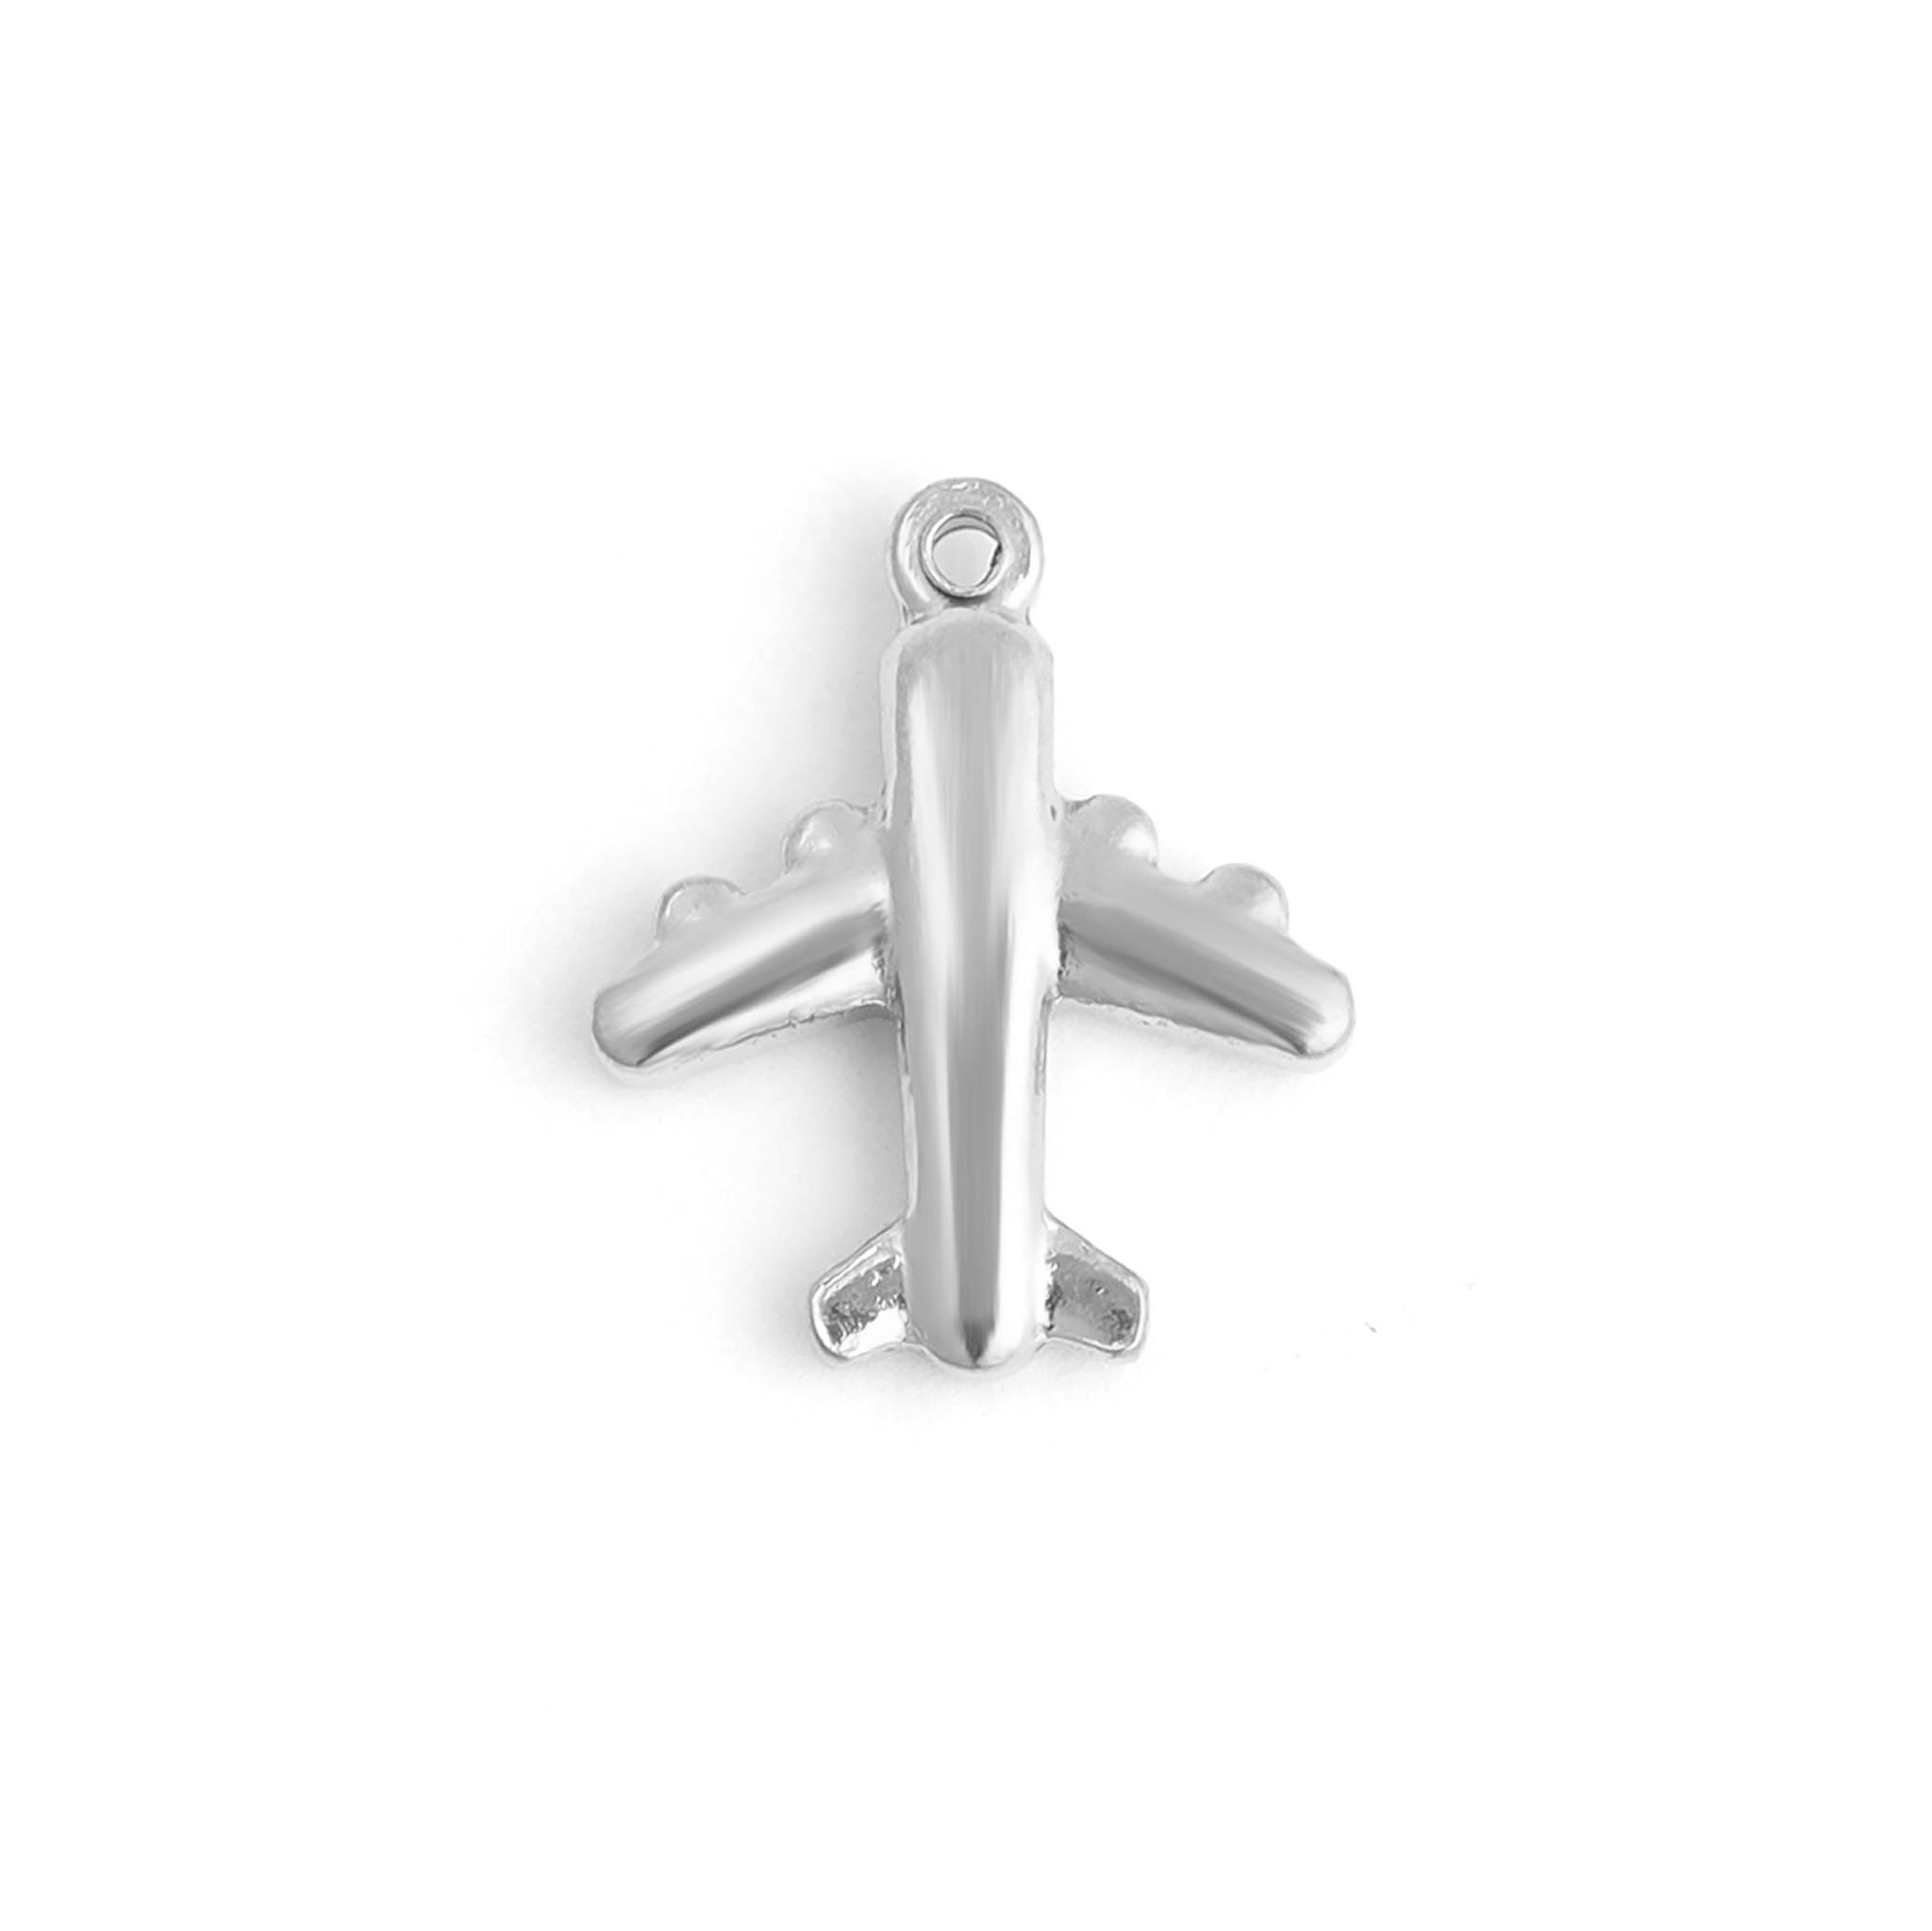 18K Gold PVD Stainless Steel Airplane Charm / PDL0095